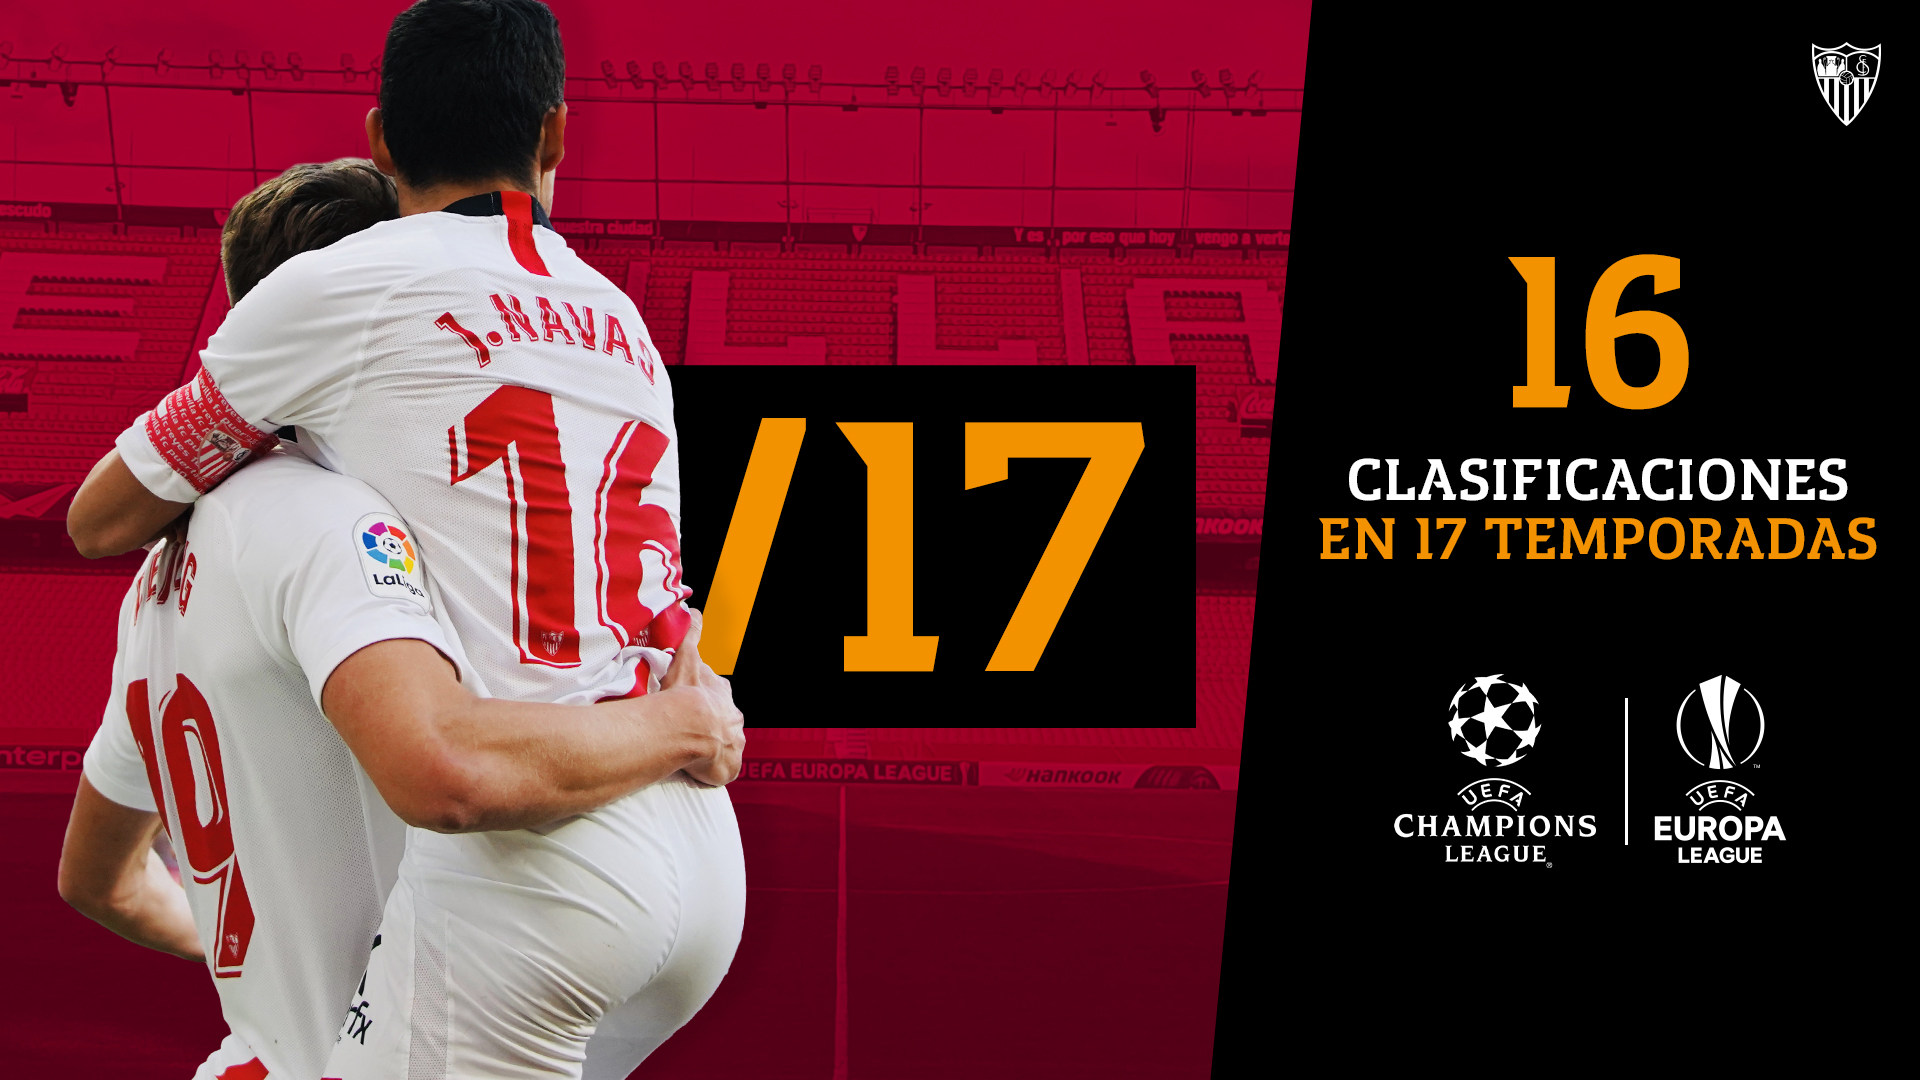 Sevilla FC have qualified for Europe